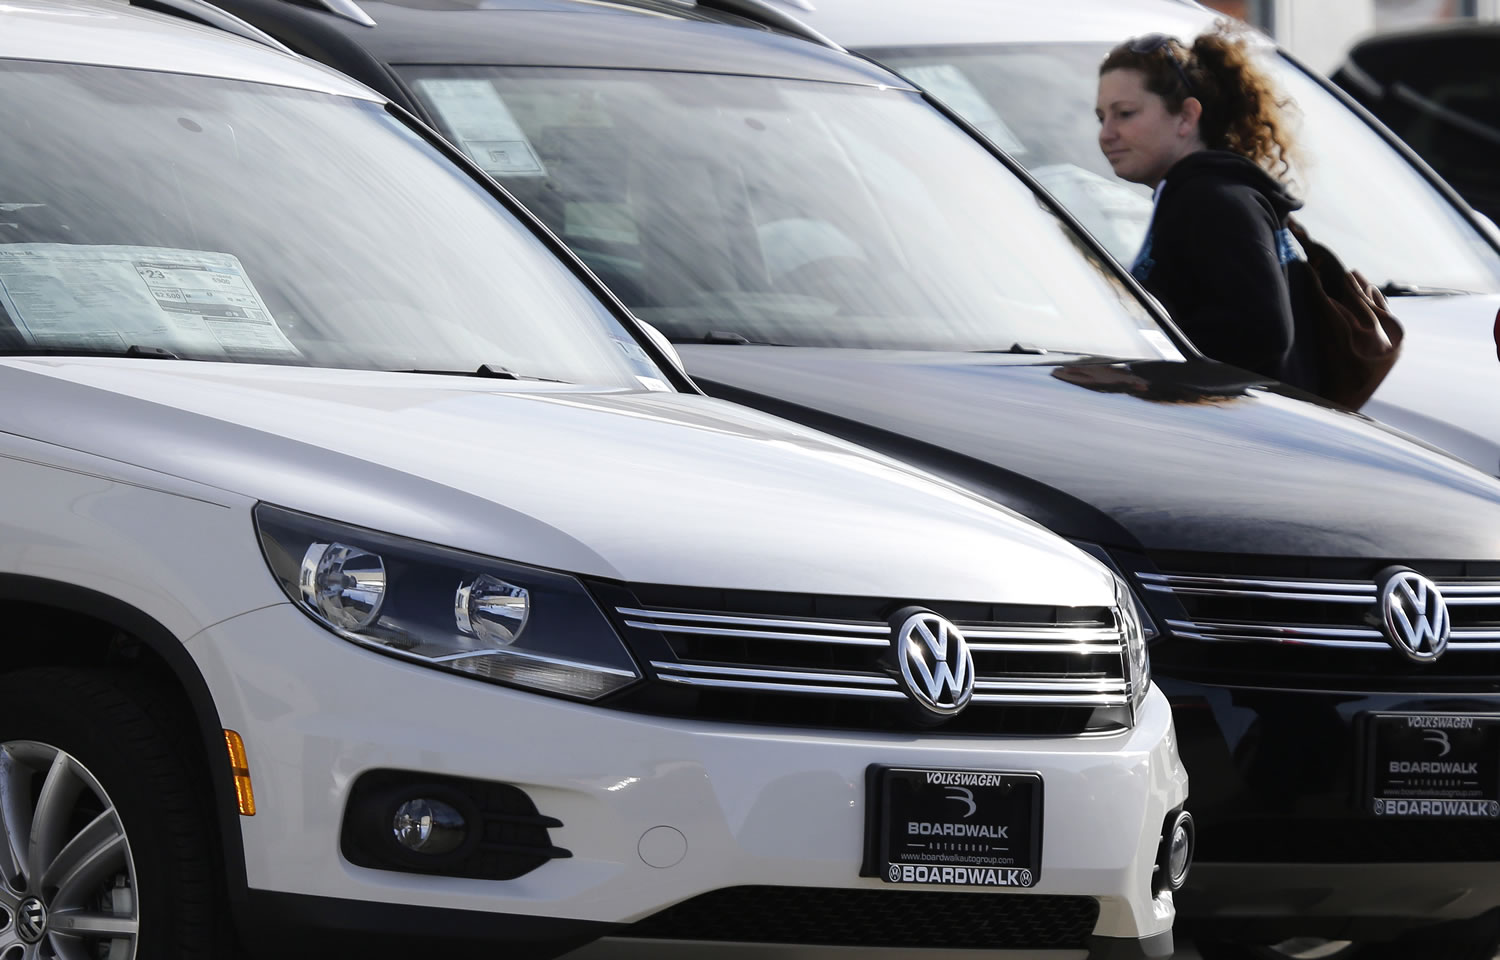 LM Otero/Associated Press
Meredith Havens looks at Volkswagens at a dealership in Richardson, Texas. Volkswagen reported its best February since 1973. The company's sales were up 3 percent. Sales of the new Beetle nearly tripled in February.